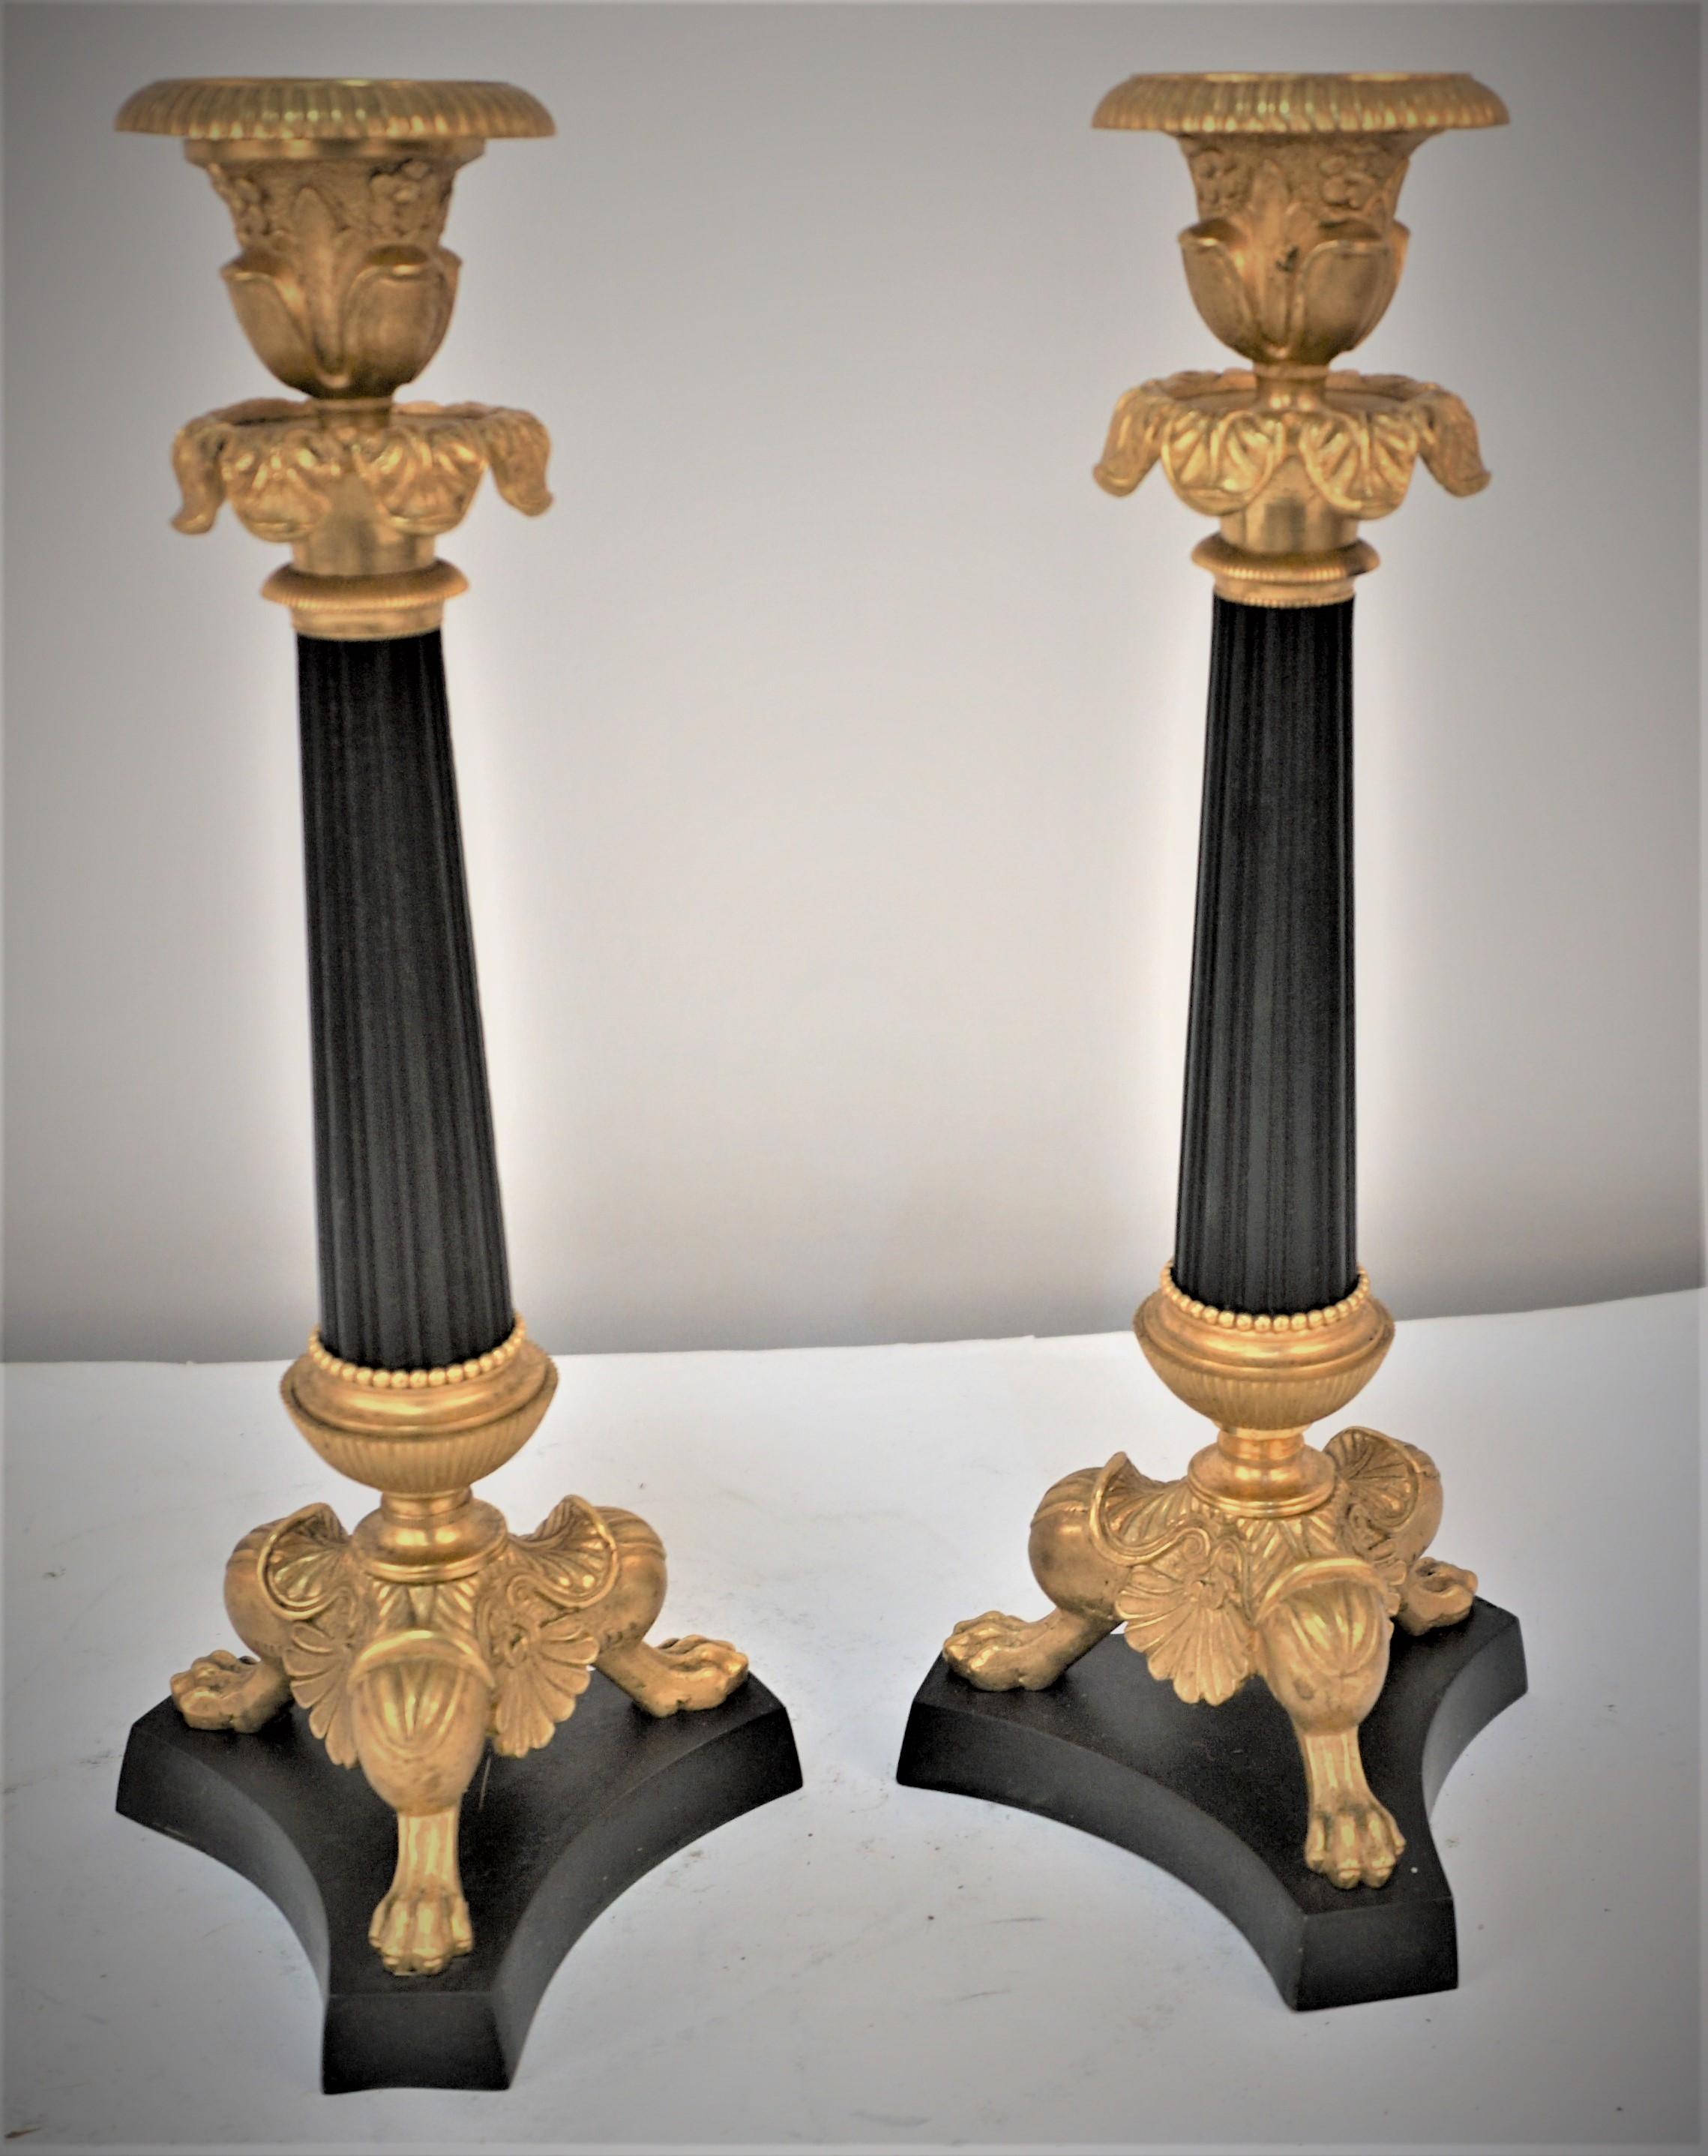 A pair of 19th century Regency gilt bronze and oxidized black candlesticks, with three lion's claws. #2.